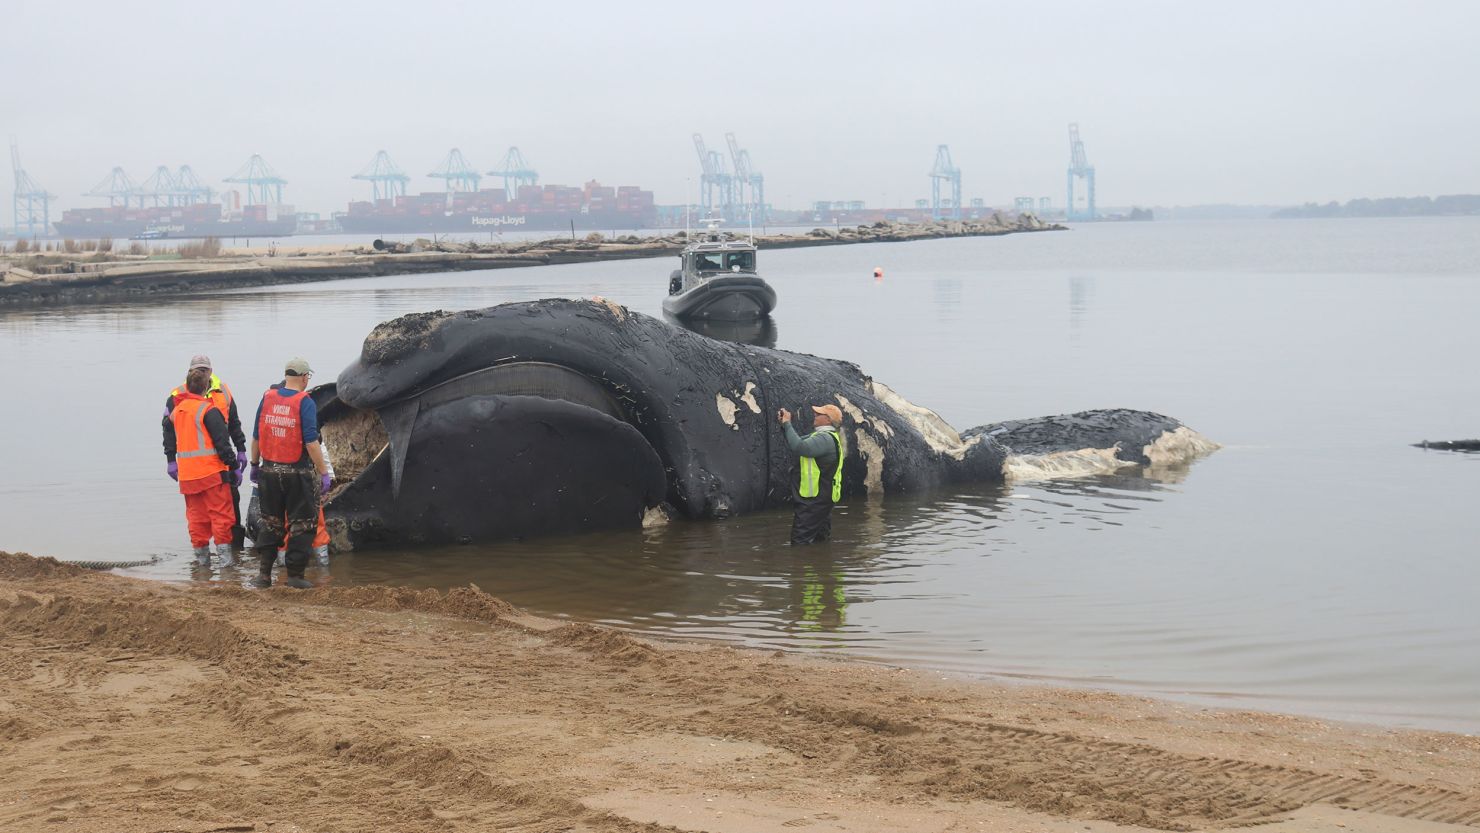 A dead North Atlantic right whale is seen on a Virginia beach. Federal authorities say the whale died after suffering blunt force trauma, probably from a vessel strike.